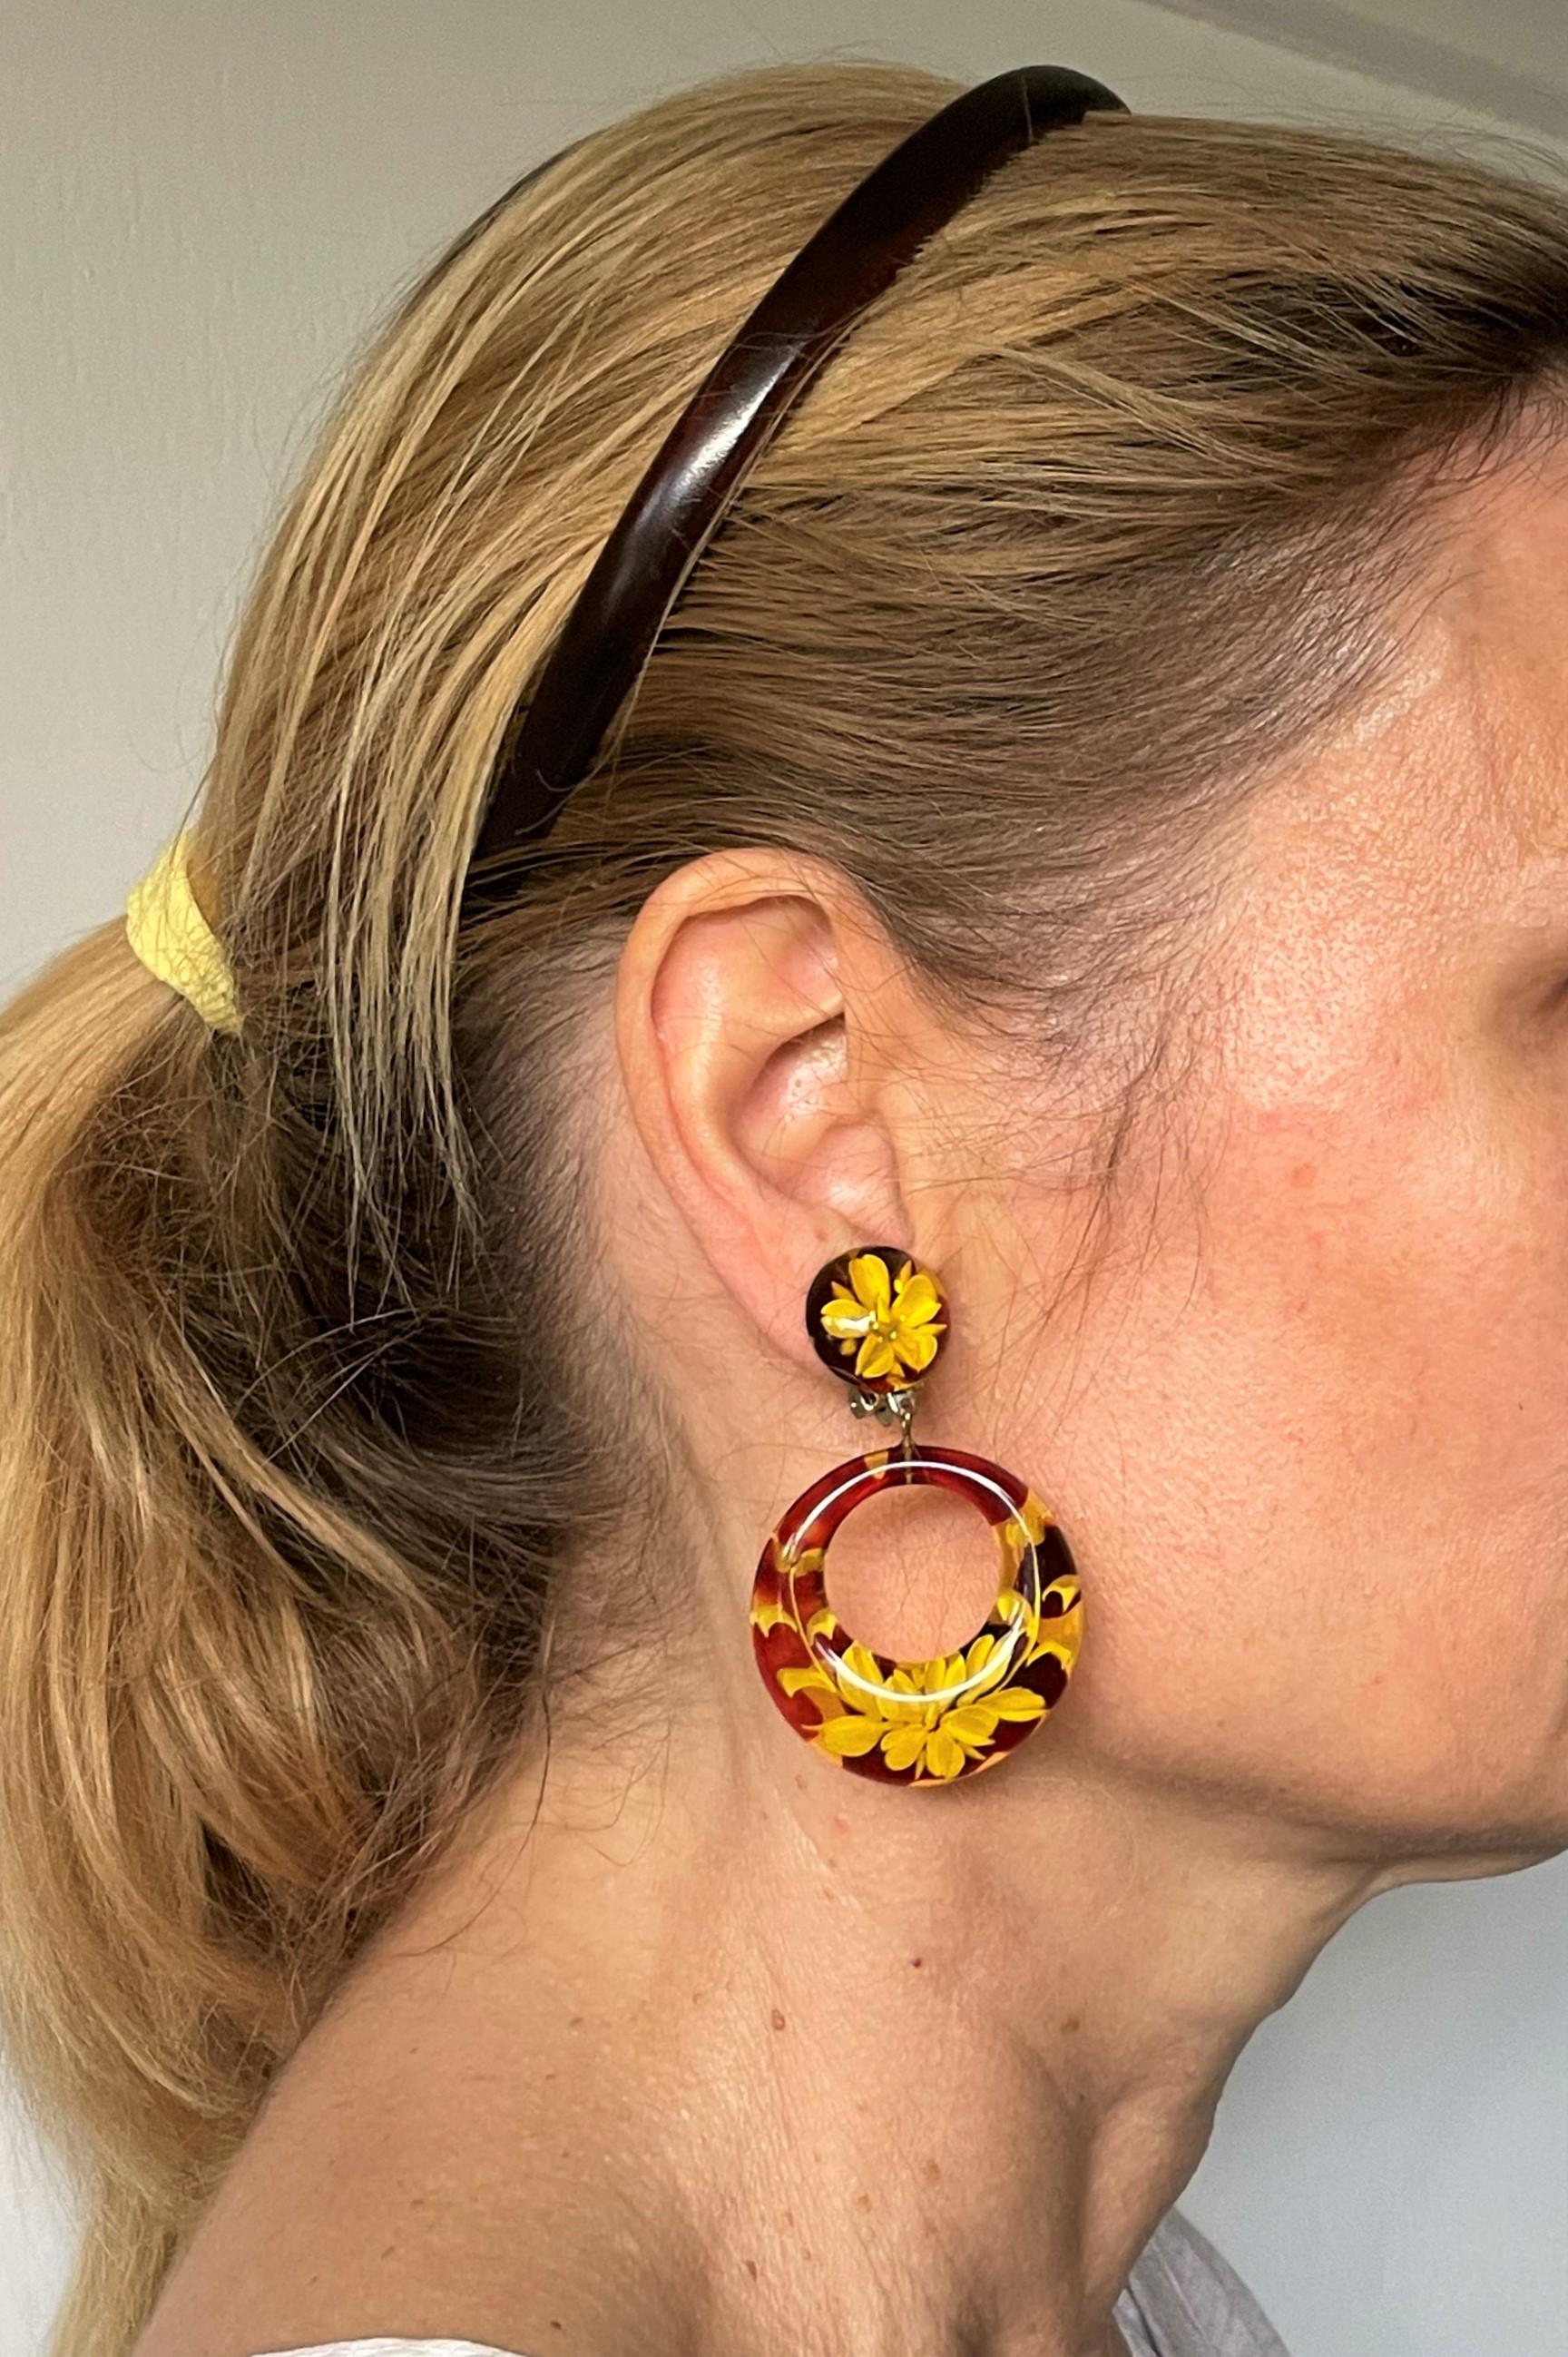 About
Vintage dangling ear clips in brown and yellow flower carving .
Measurement:
Length  2.36 inches ( 6 cm), upper round part 0.67 inches ( 1,7cm) and 1,57 inches ( 4 cm) attached carved circle
Width    1.46 inches  ( 3,7 cm)
Features:
Carved